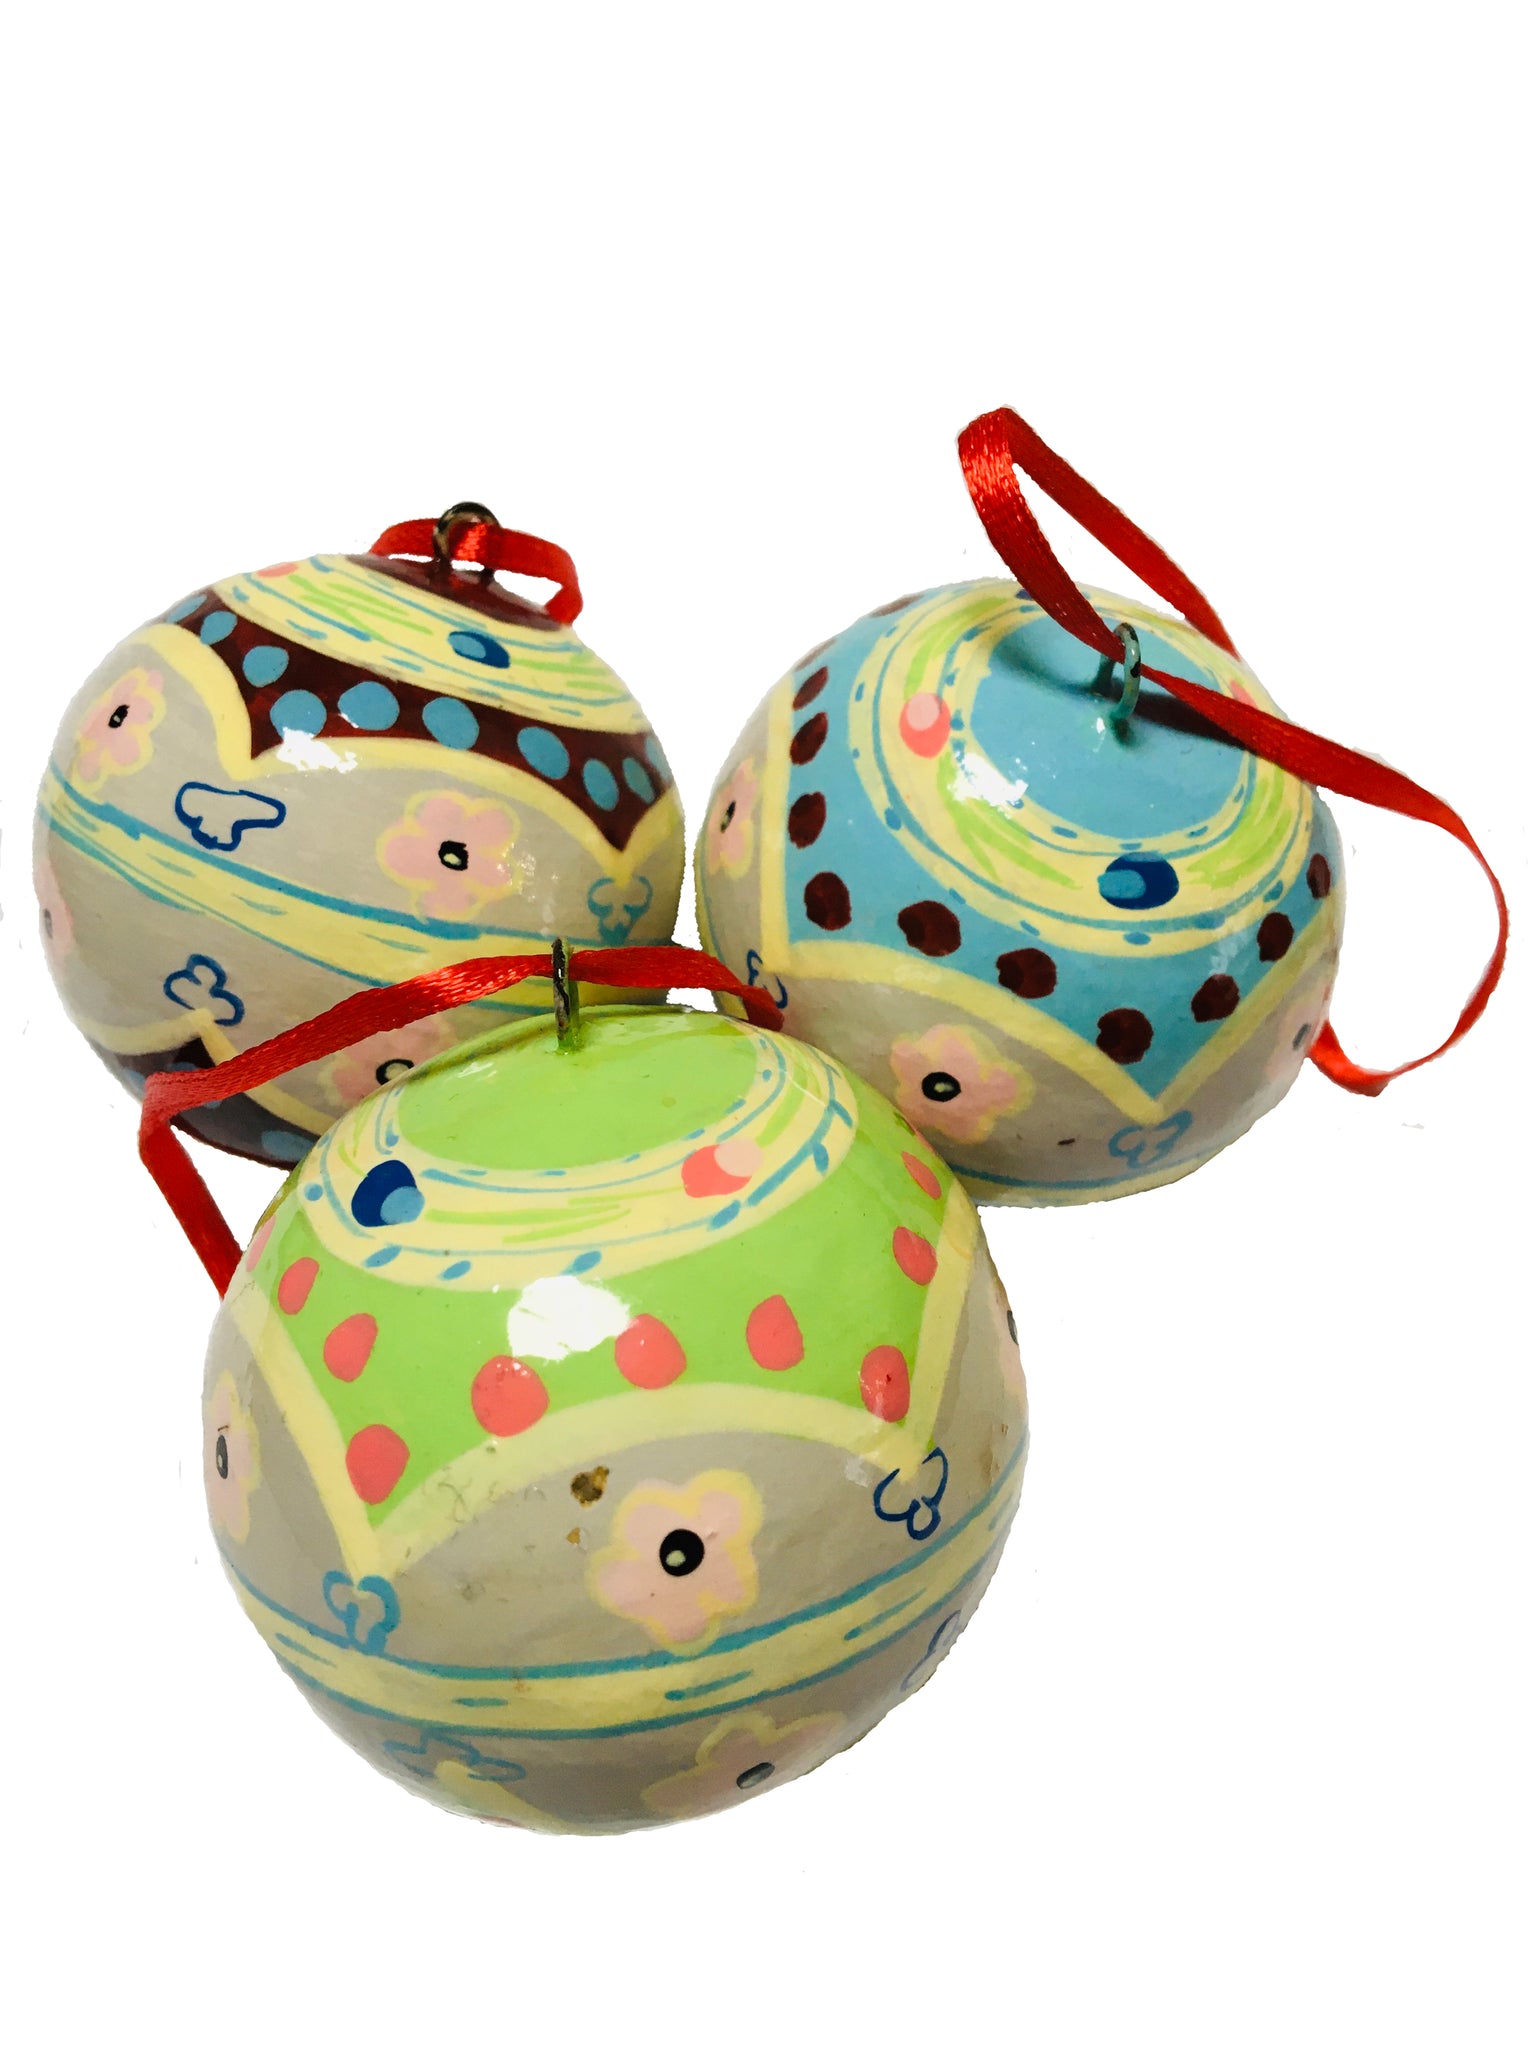 A set of three round baubles with traditional folk patterns in shades of cream, green, pink, yellow, blue and brown. They have a red ribbon for hanging and are on a white background